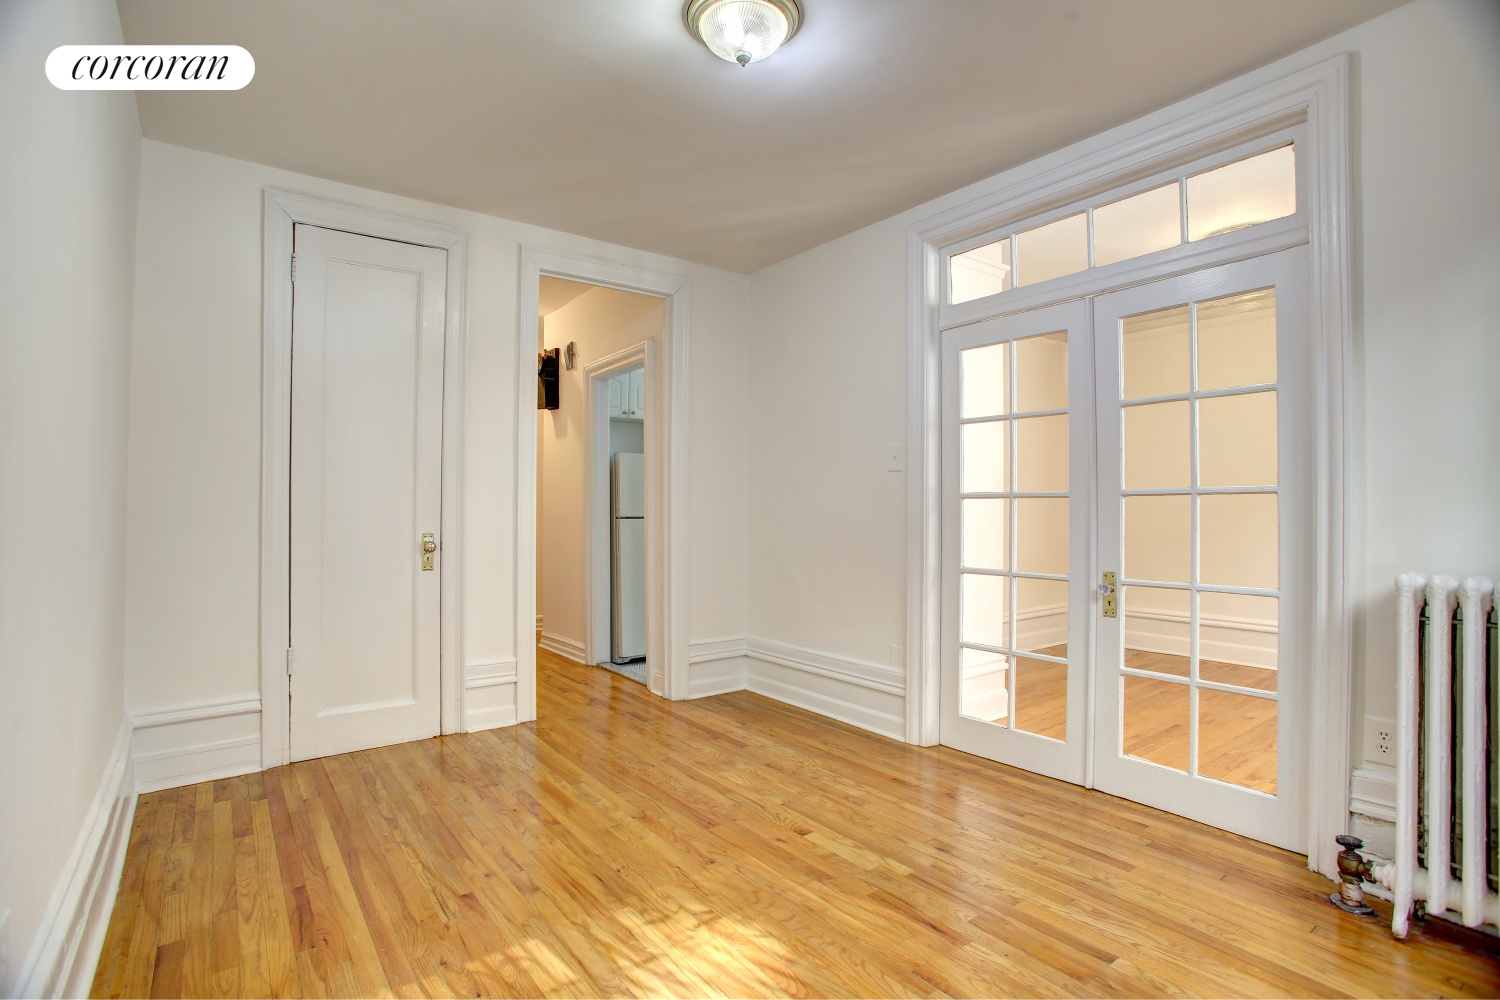 511 169TH Street, New York, New York 10032, 2 Bedrooms Bedrooms, 4 Rooms Rooms,1 BathroomBathrooms,Residential Lease,For Rent,169TH,RPLU-33422898822